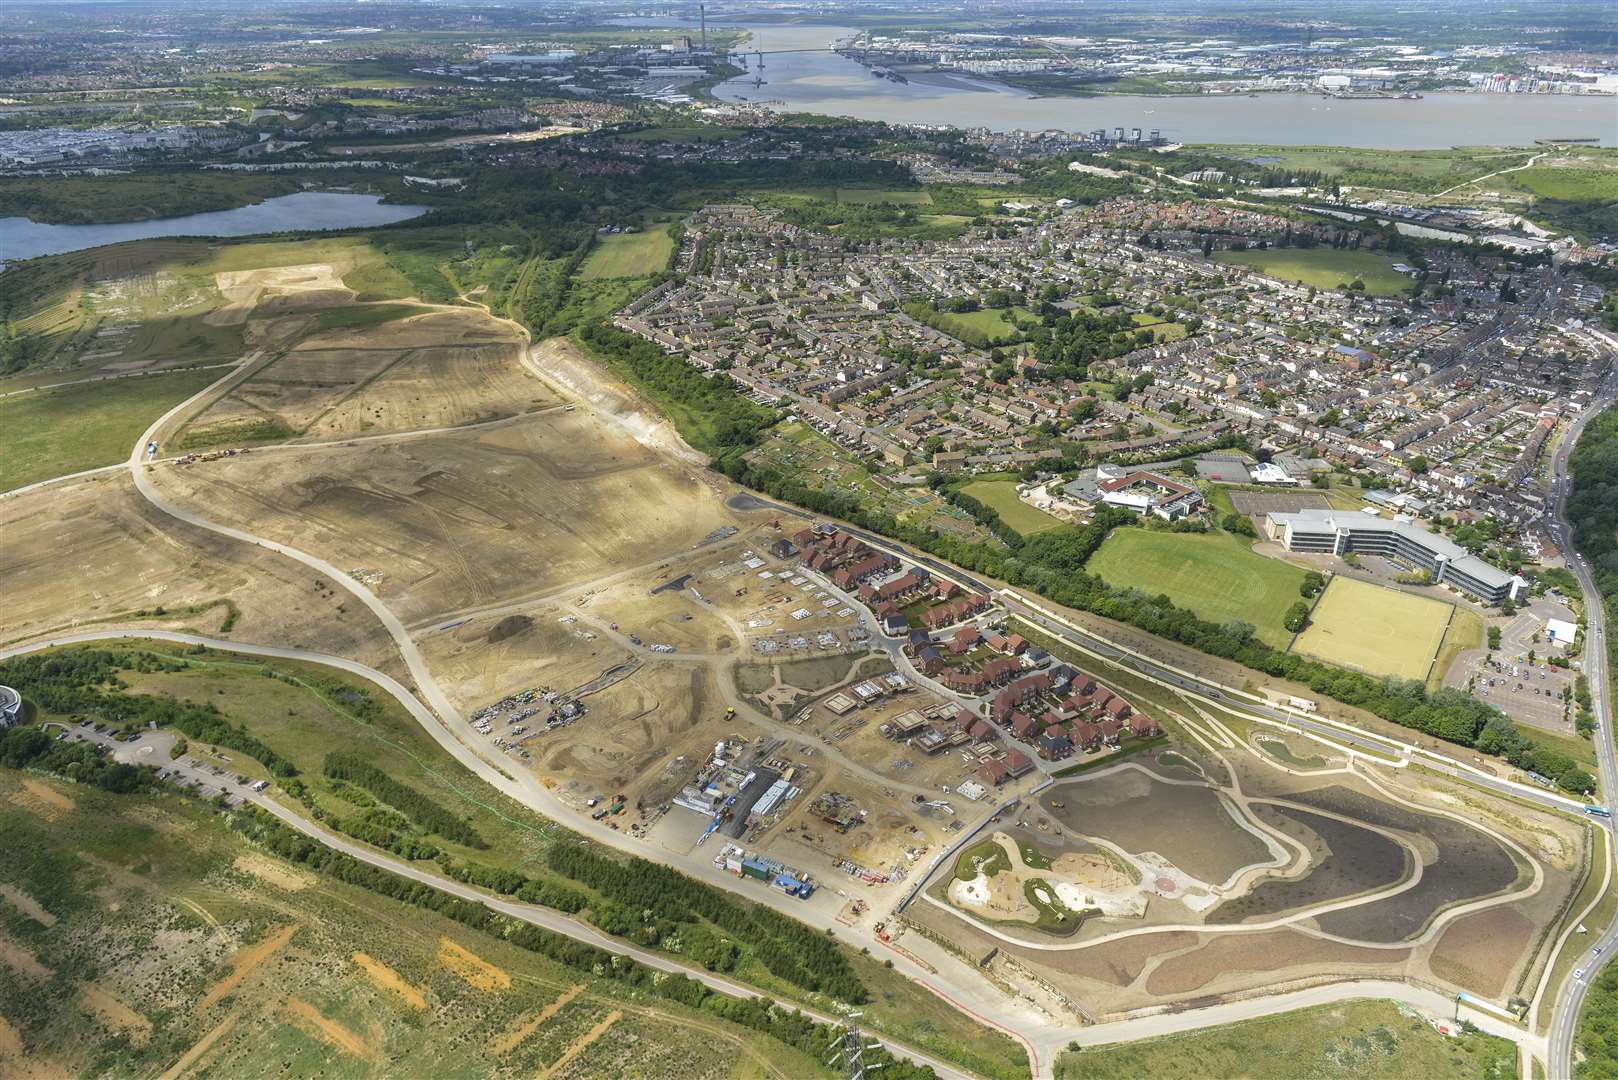 The Eastern Quarry at the sprawling Ebbsfleet Garden City